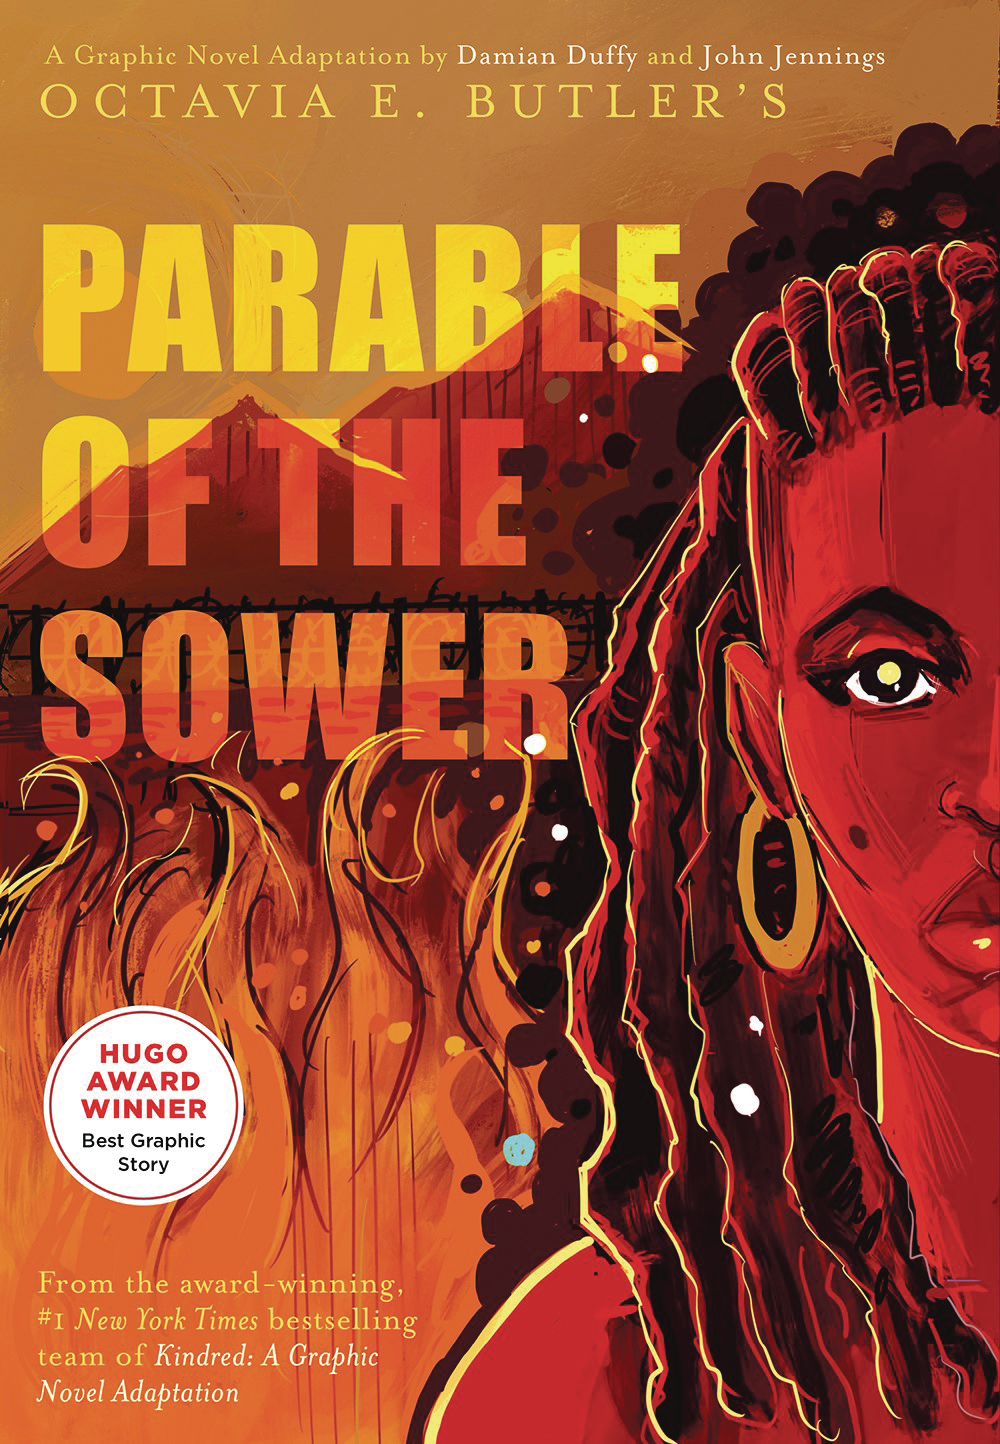 Octavia Butler Parable of the Sower Hardcover Graphic Novel